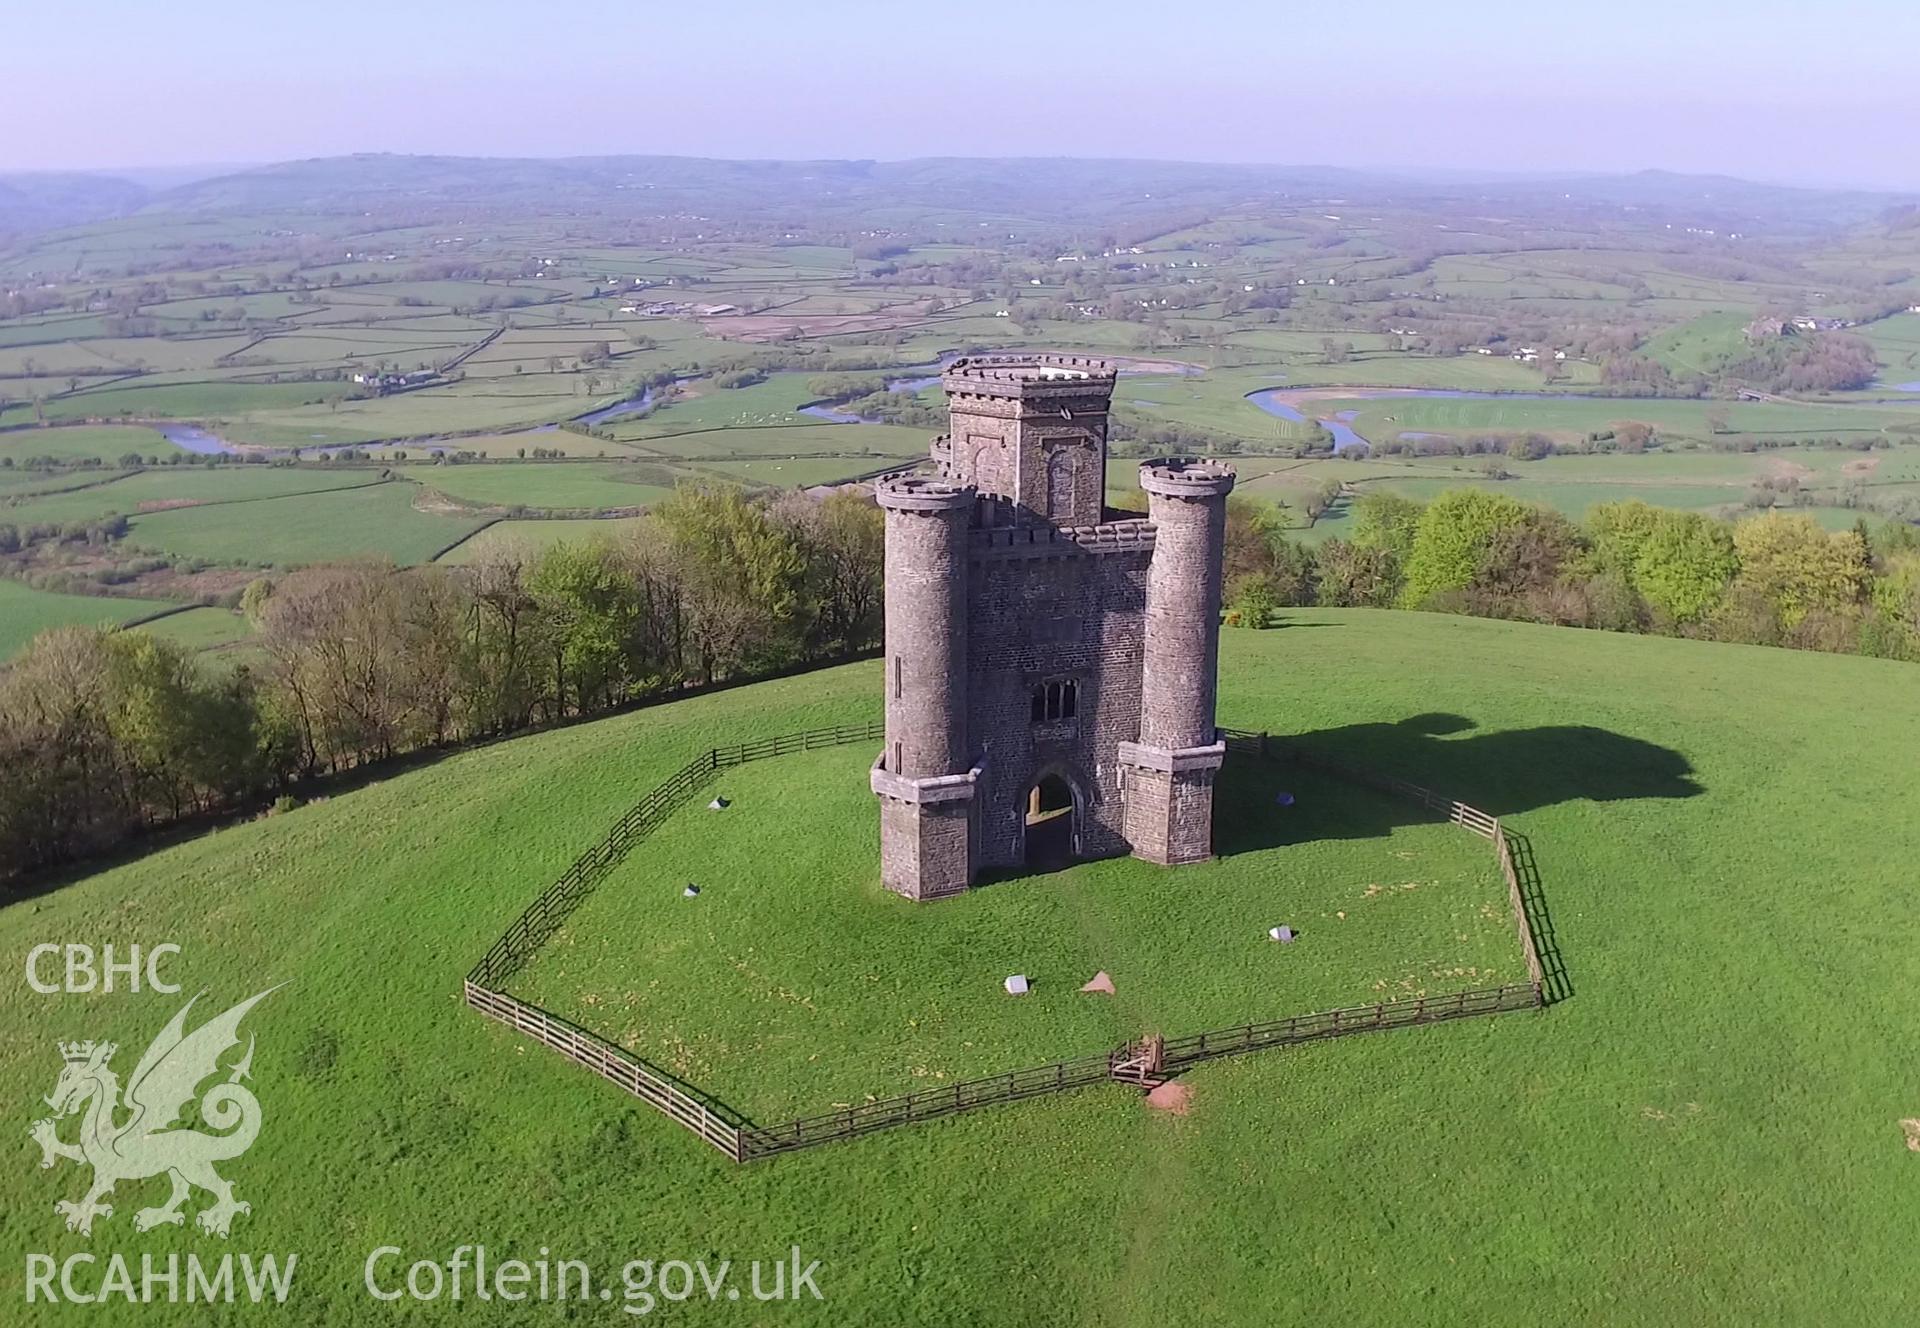 Colour photo showing view of Nelson's Tower near Middleton Hall, Llanarthney, in it's landscape, taken by Paul R. Davis, 6th May 2018.